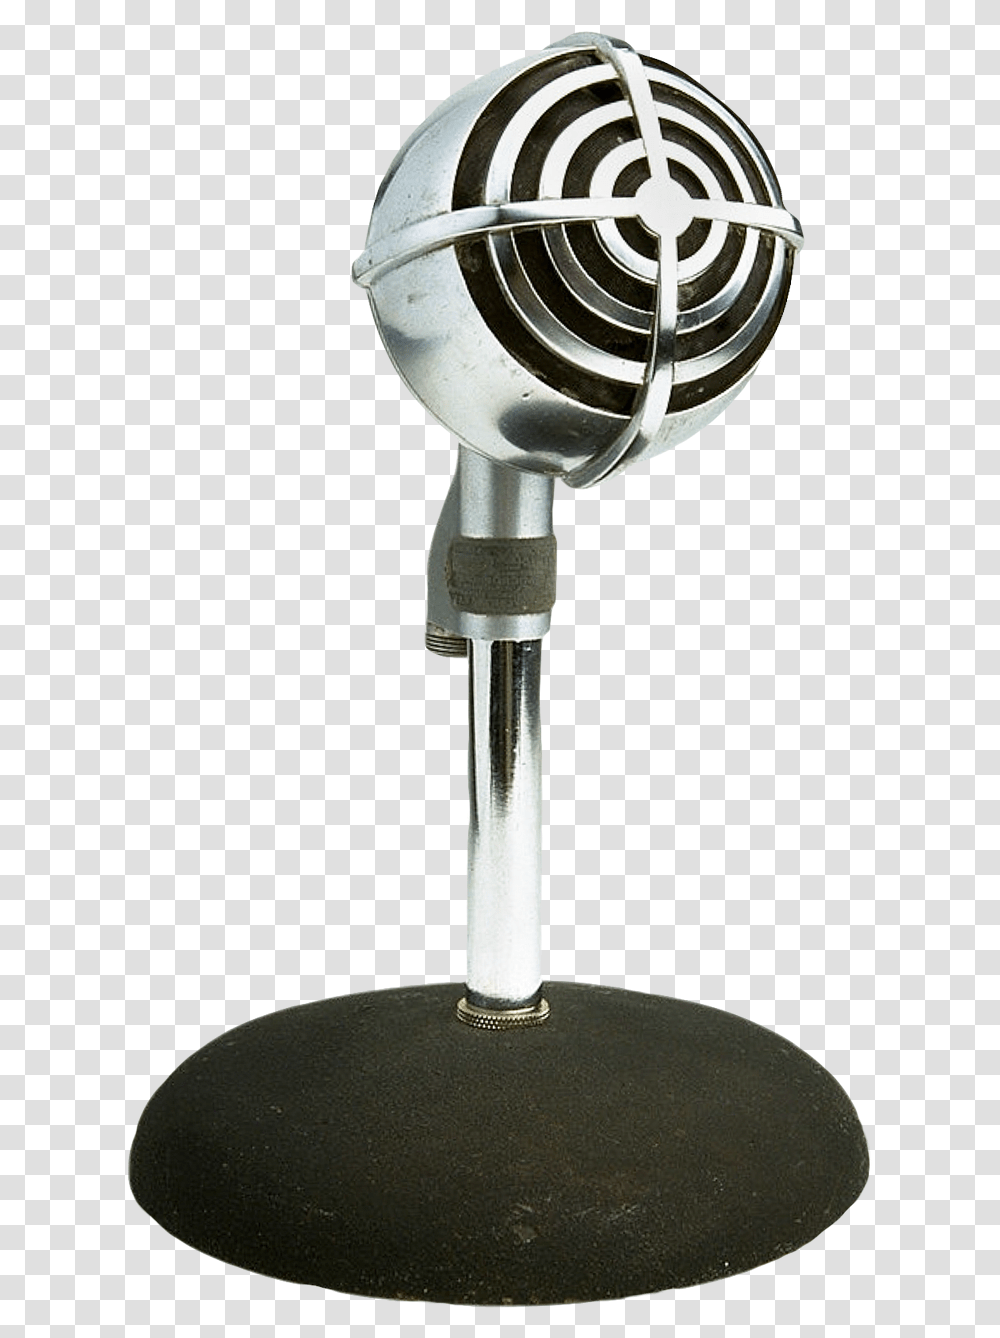 Retro Style Microphone Image Pngpix Microphone, Electrical Device Transparent Png